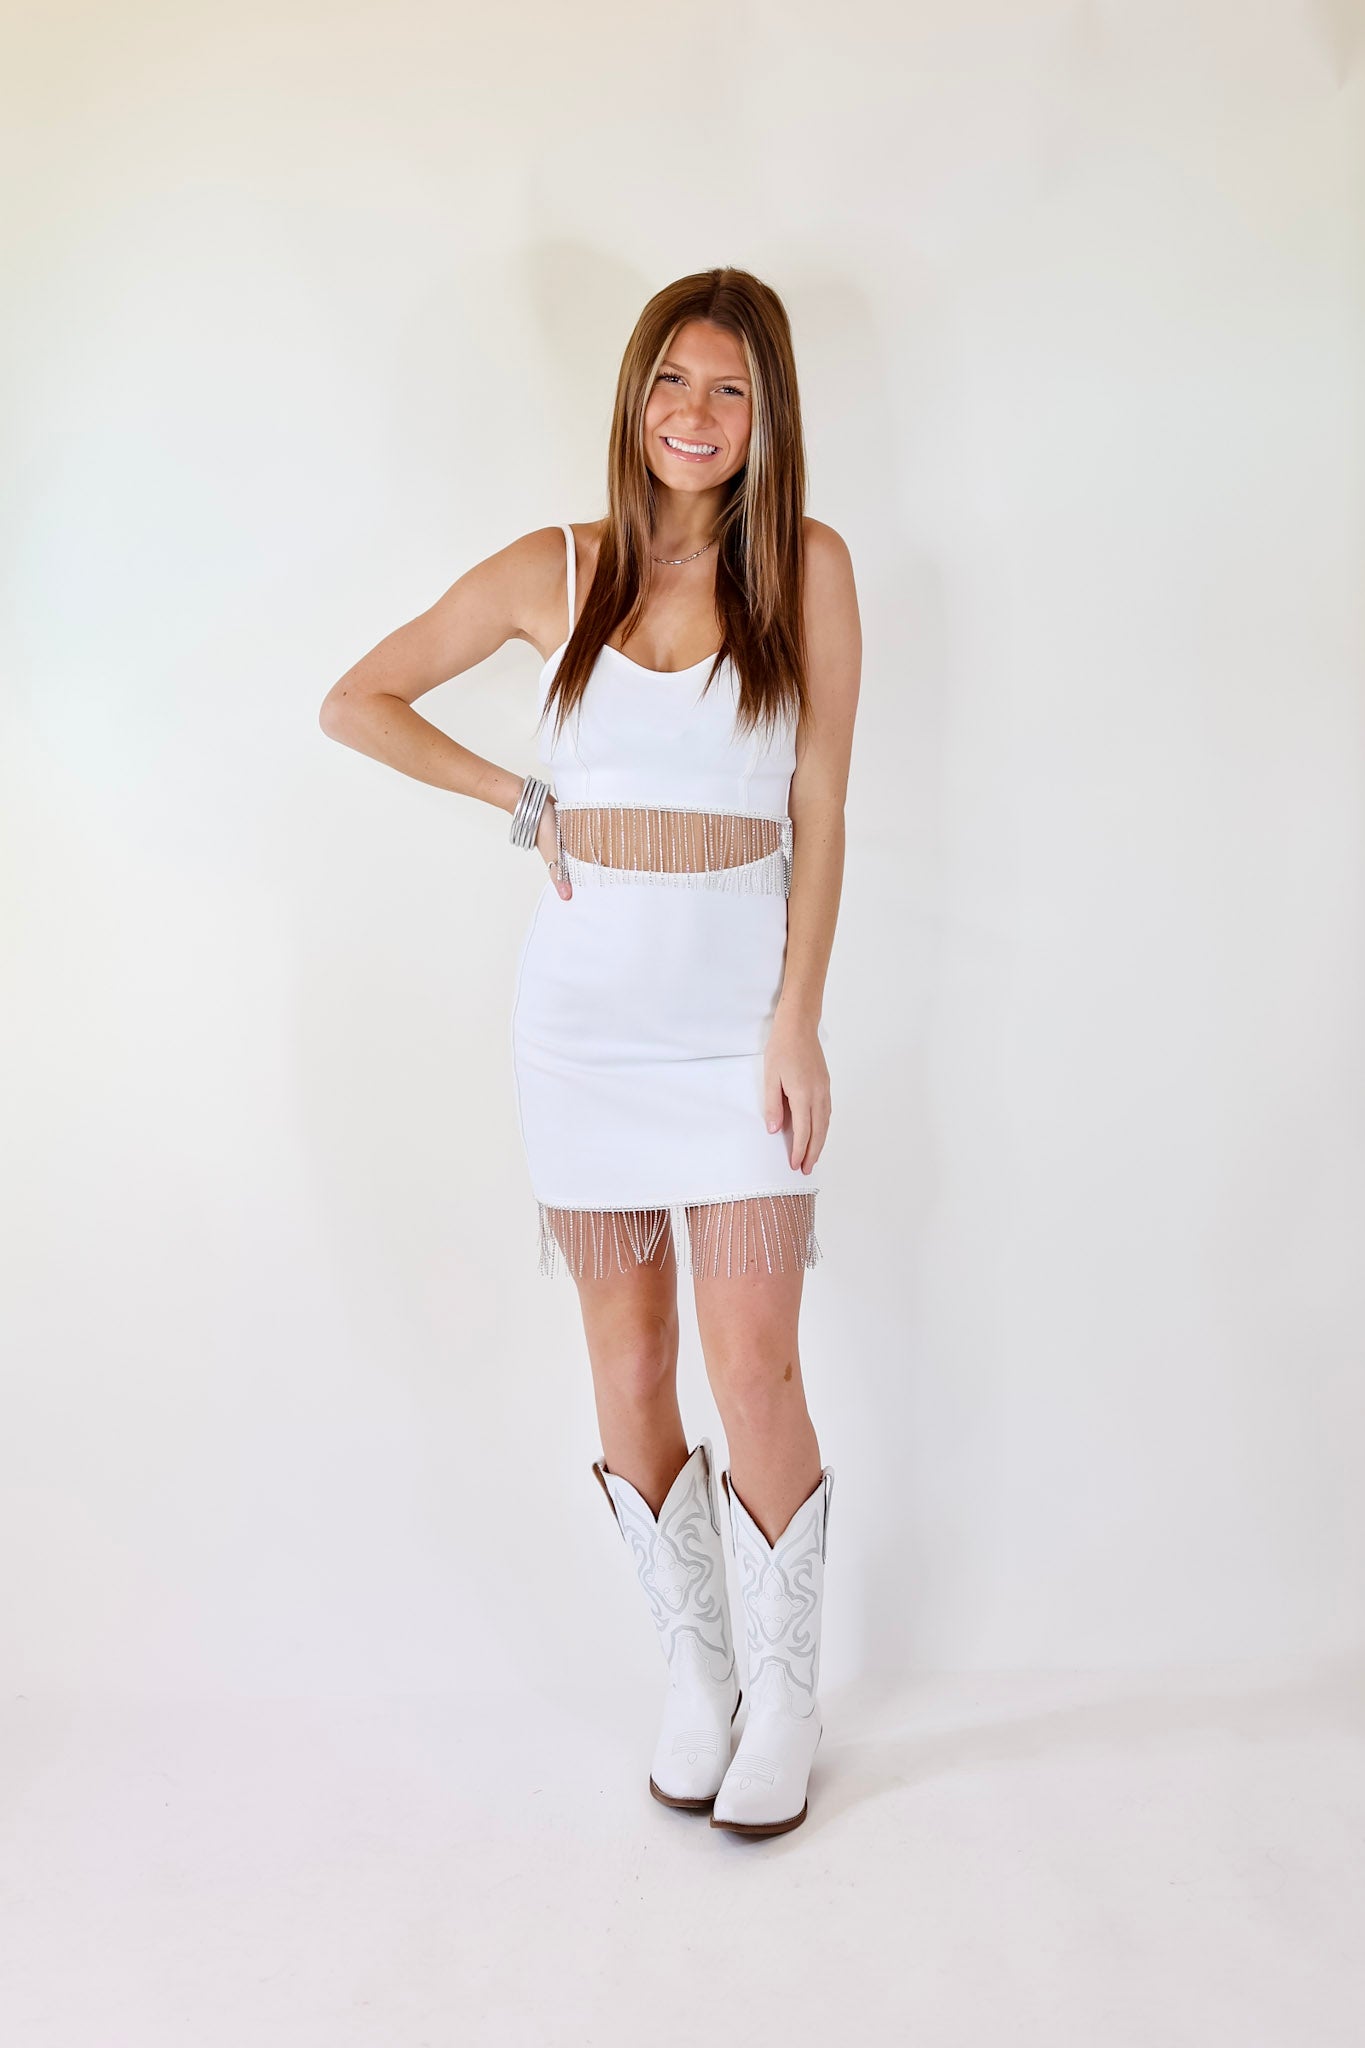 On The List Crop Top with Crystal Fringe Trim in White - Giddy Up Glamour Boutique